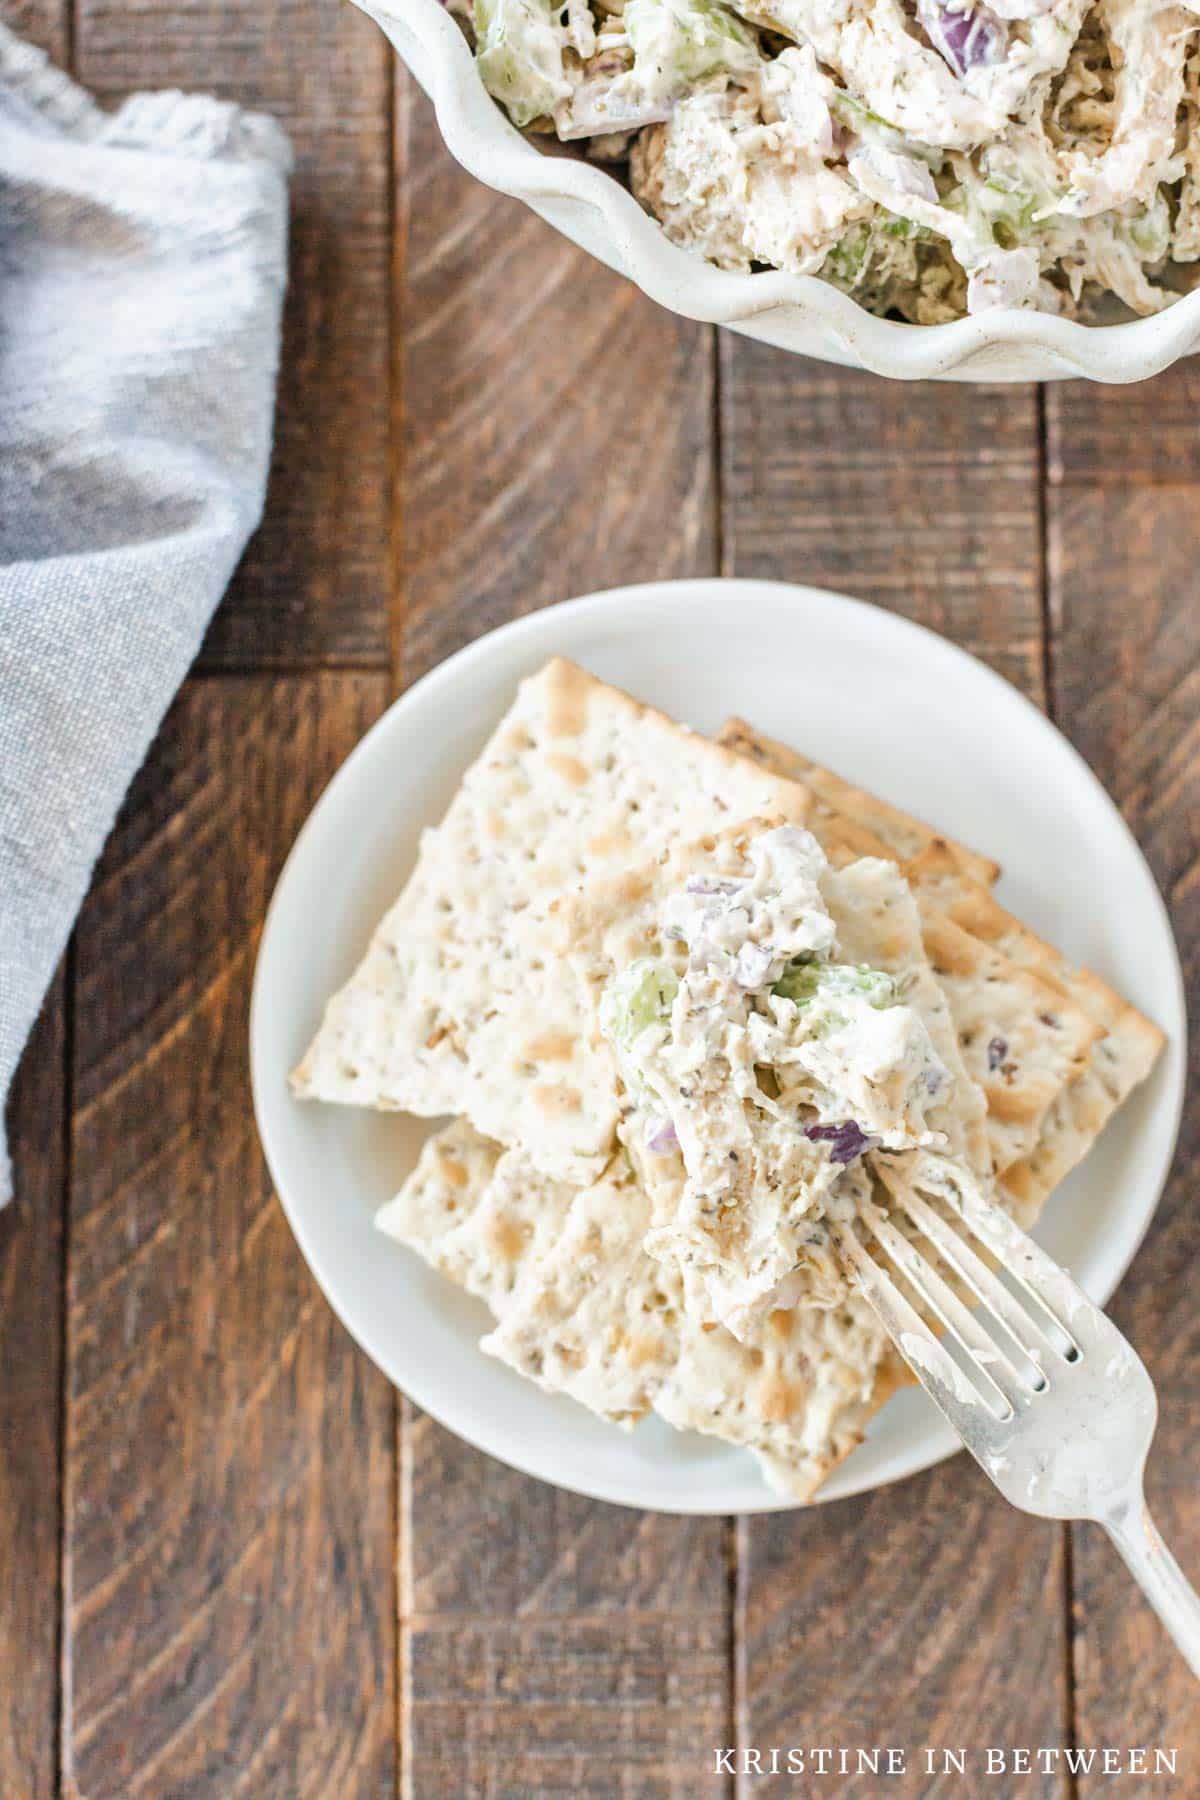 A bite of chicken salad sitting on top of crackers with a fork sitting next to it.